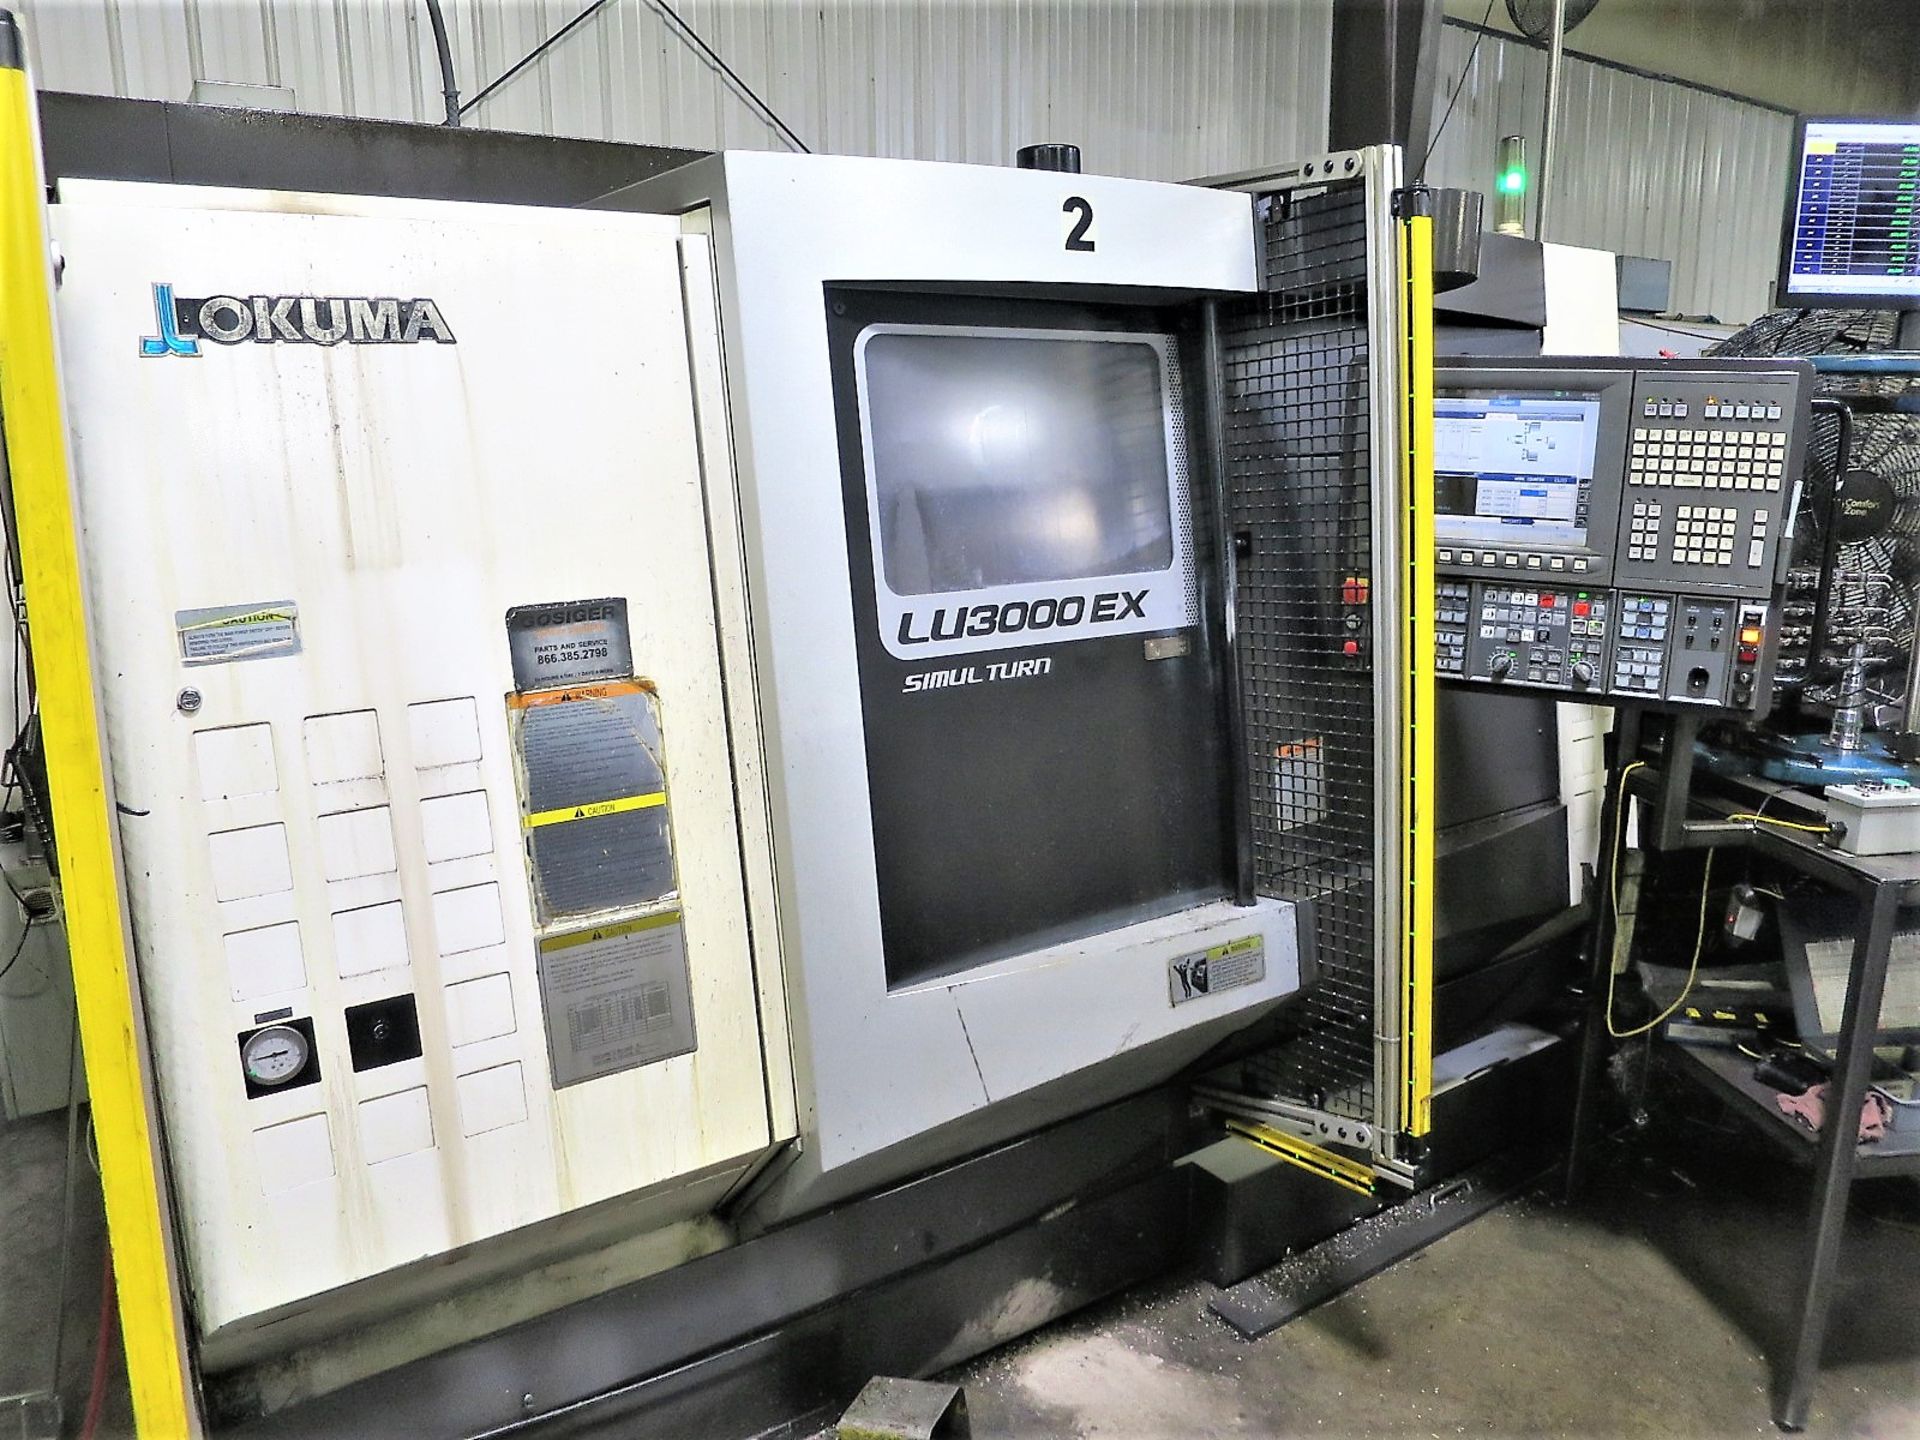 ***SOLD SOLD SOLD*** OKUMA LU-3000 EX 2SC-600 4-AXIS TWIN TURRENT CNC LATHE, NEW 2015, S/N 184757